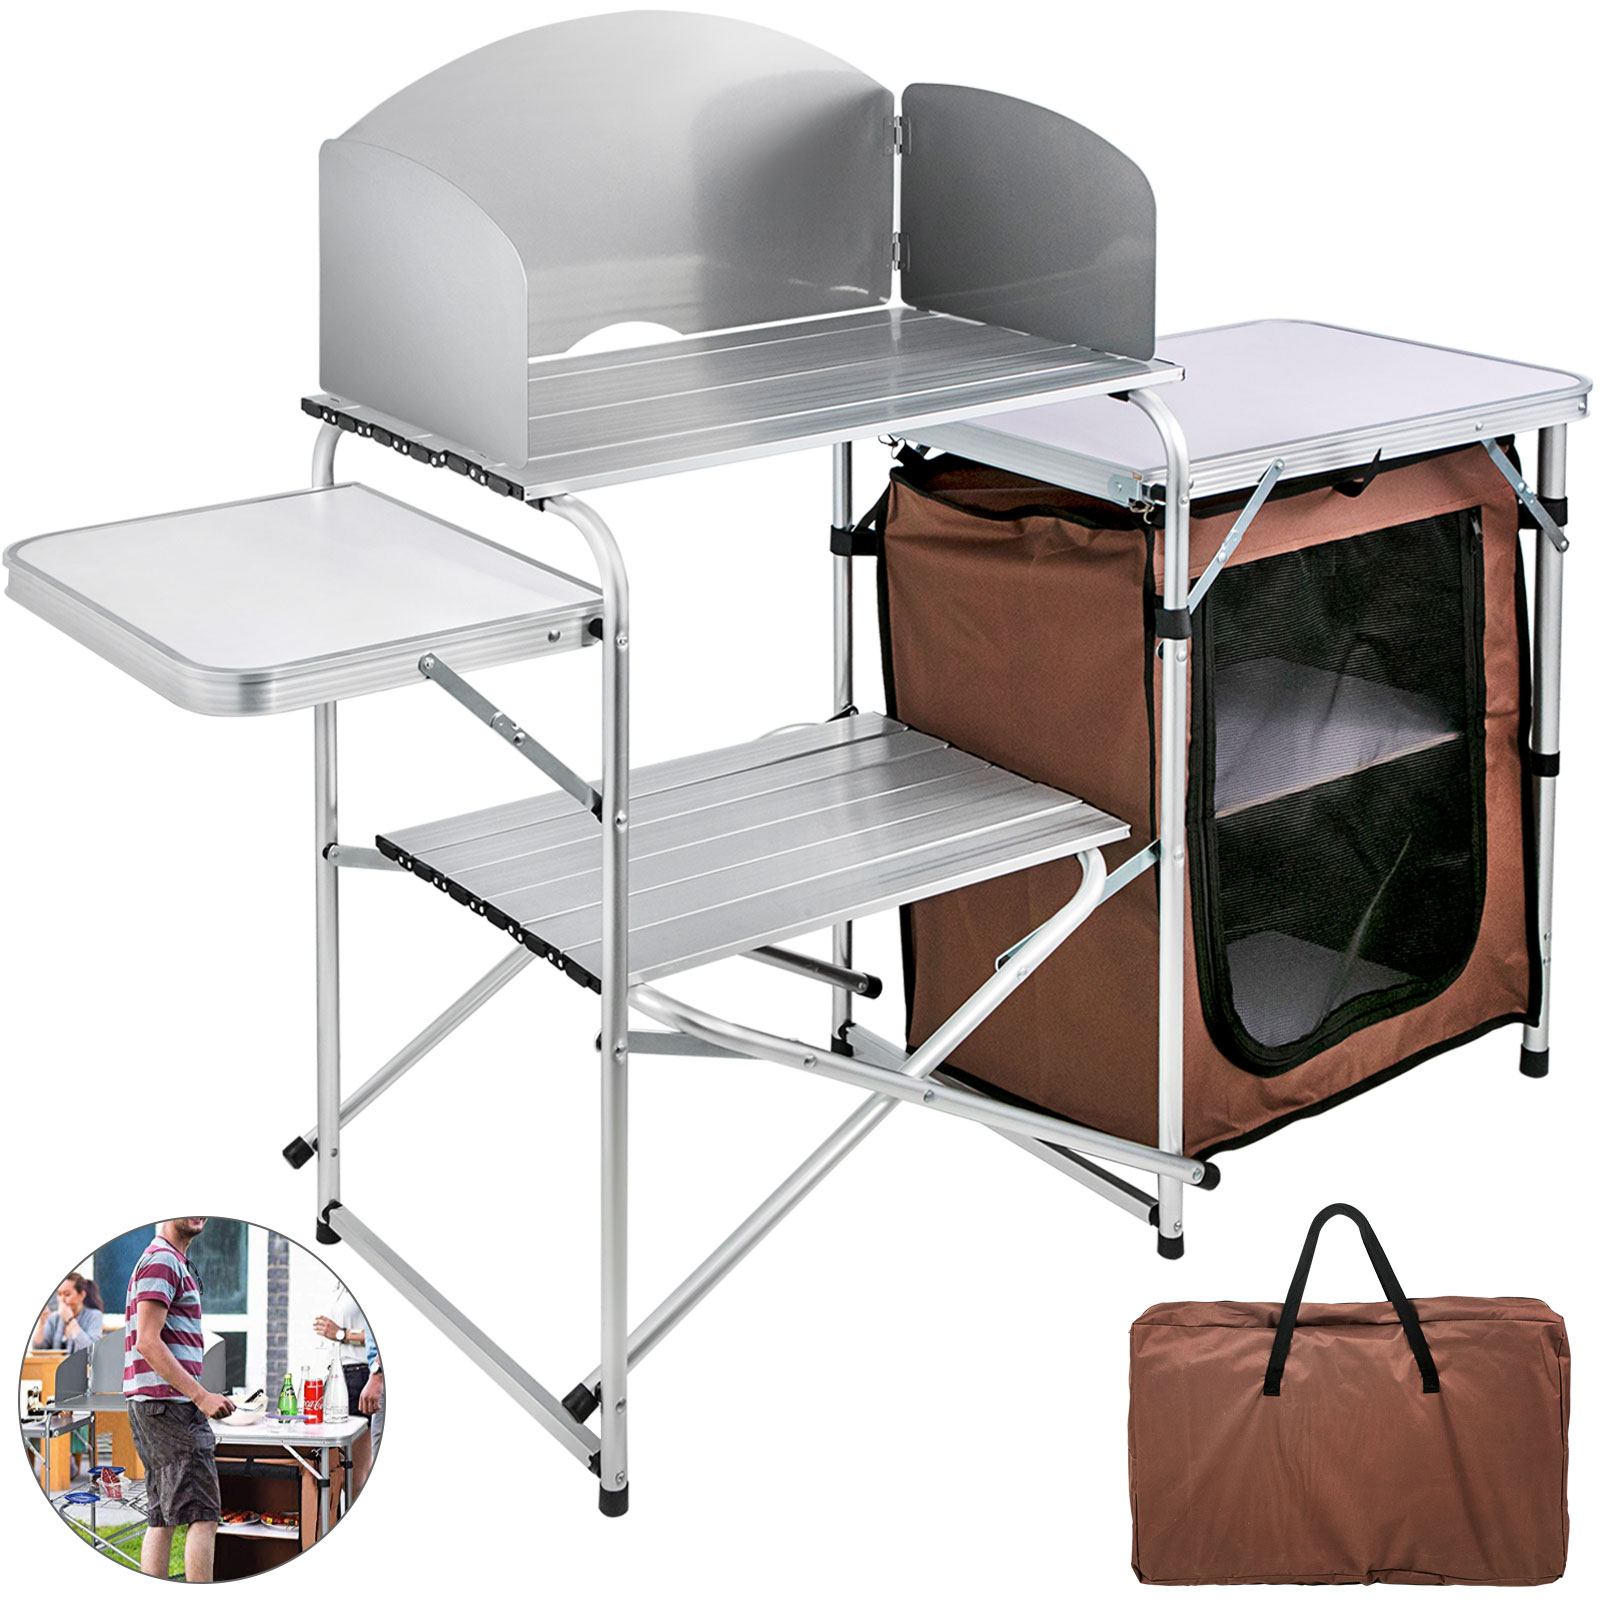 3 Tier Aluminum Kitchen Station Cooking Dining Table Camping Cupboard w/ Handbag 